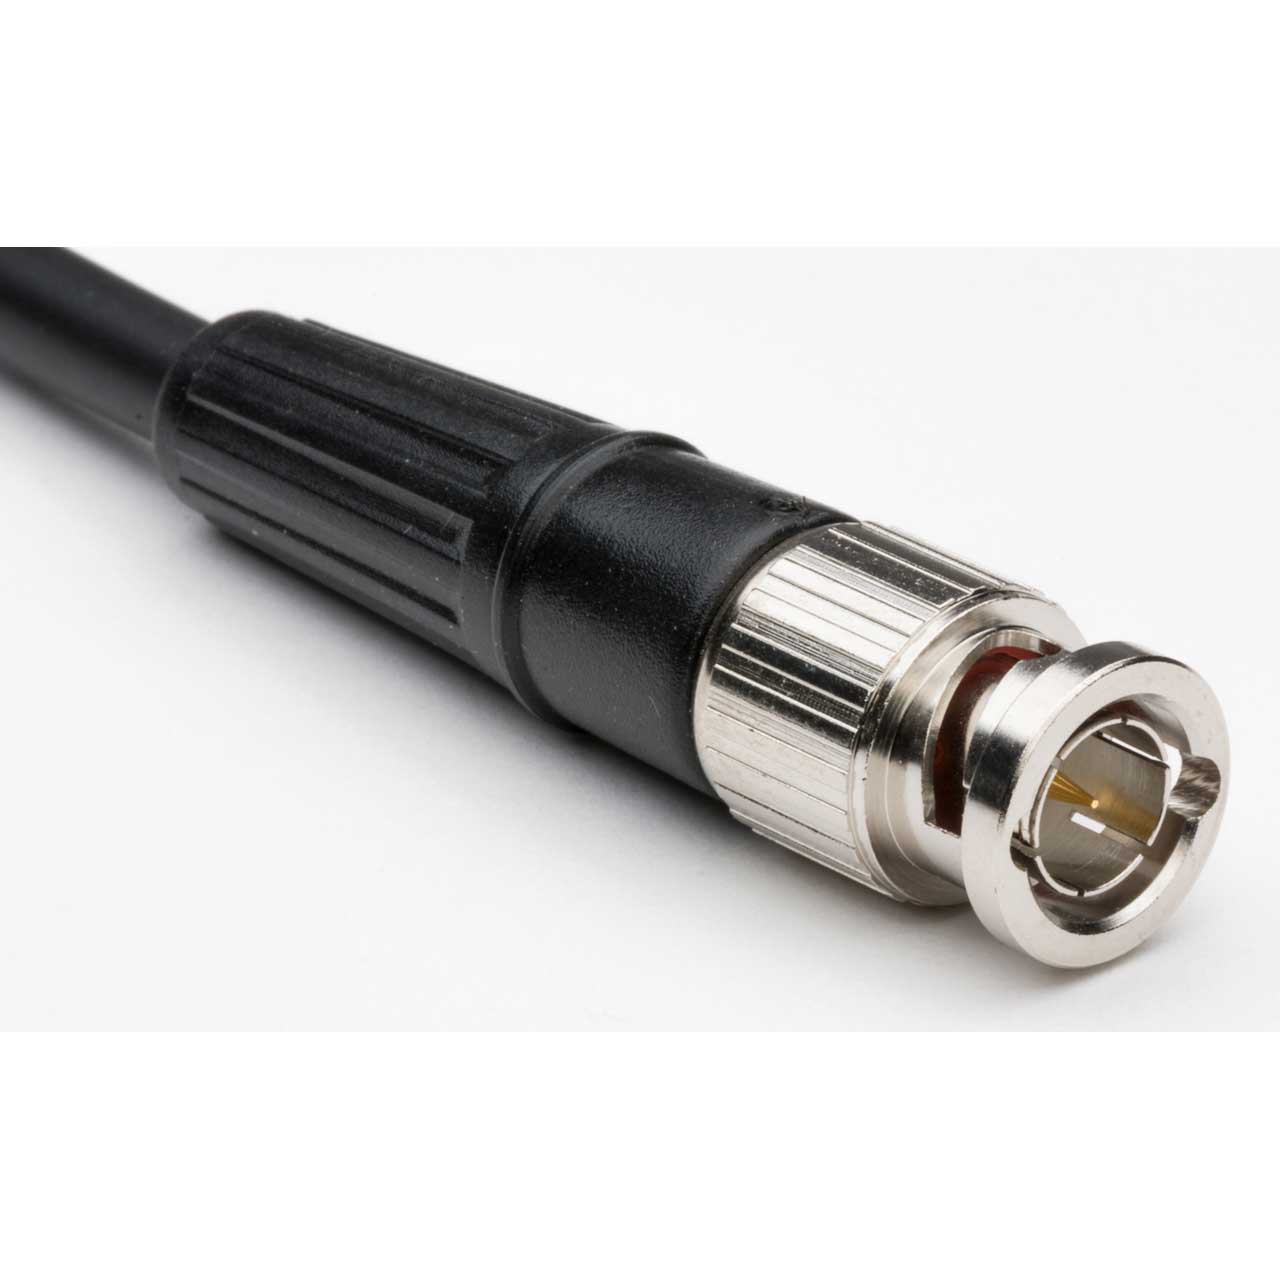 Connectronics S Video To Composite Bnc Video Cable Ft For Monitoring